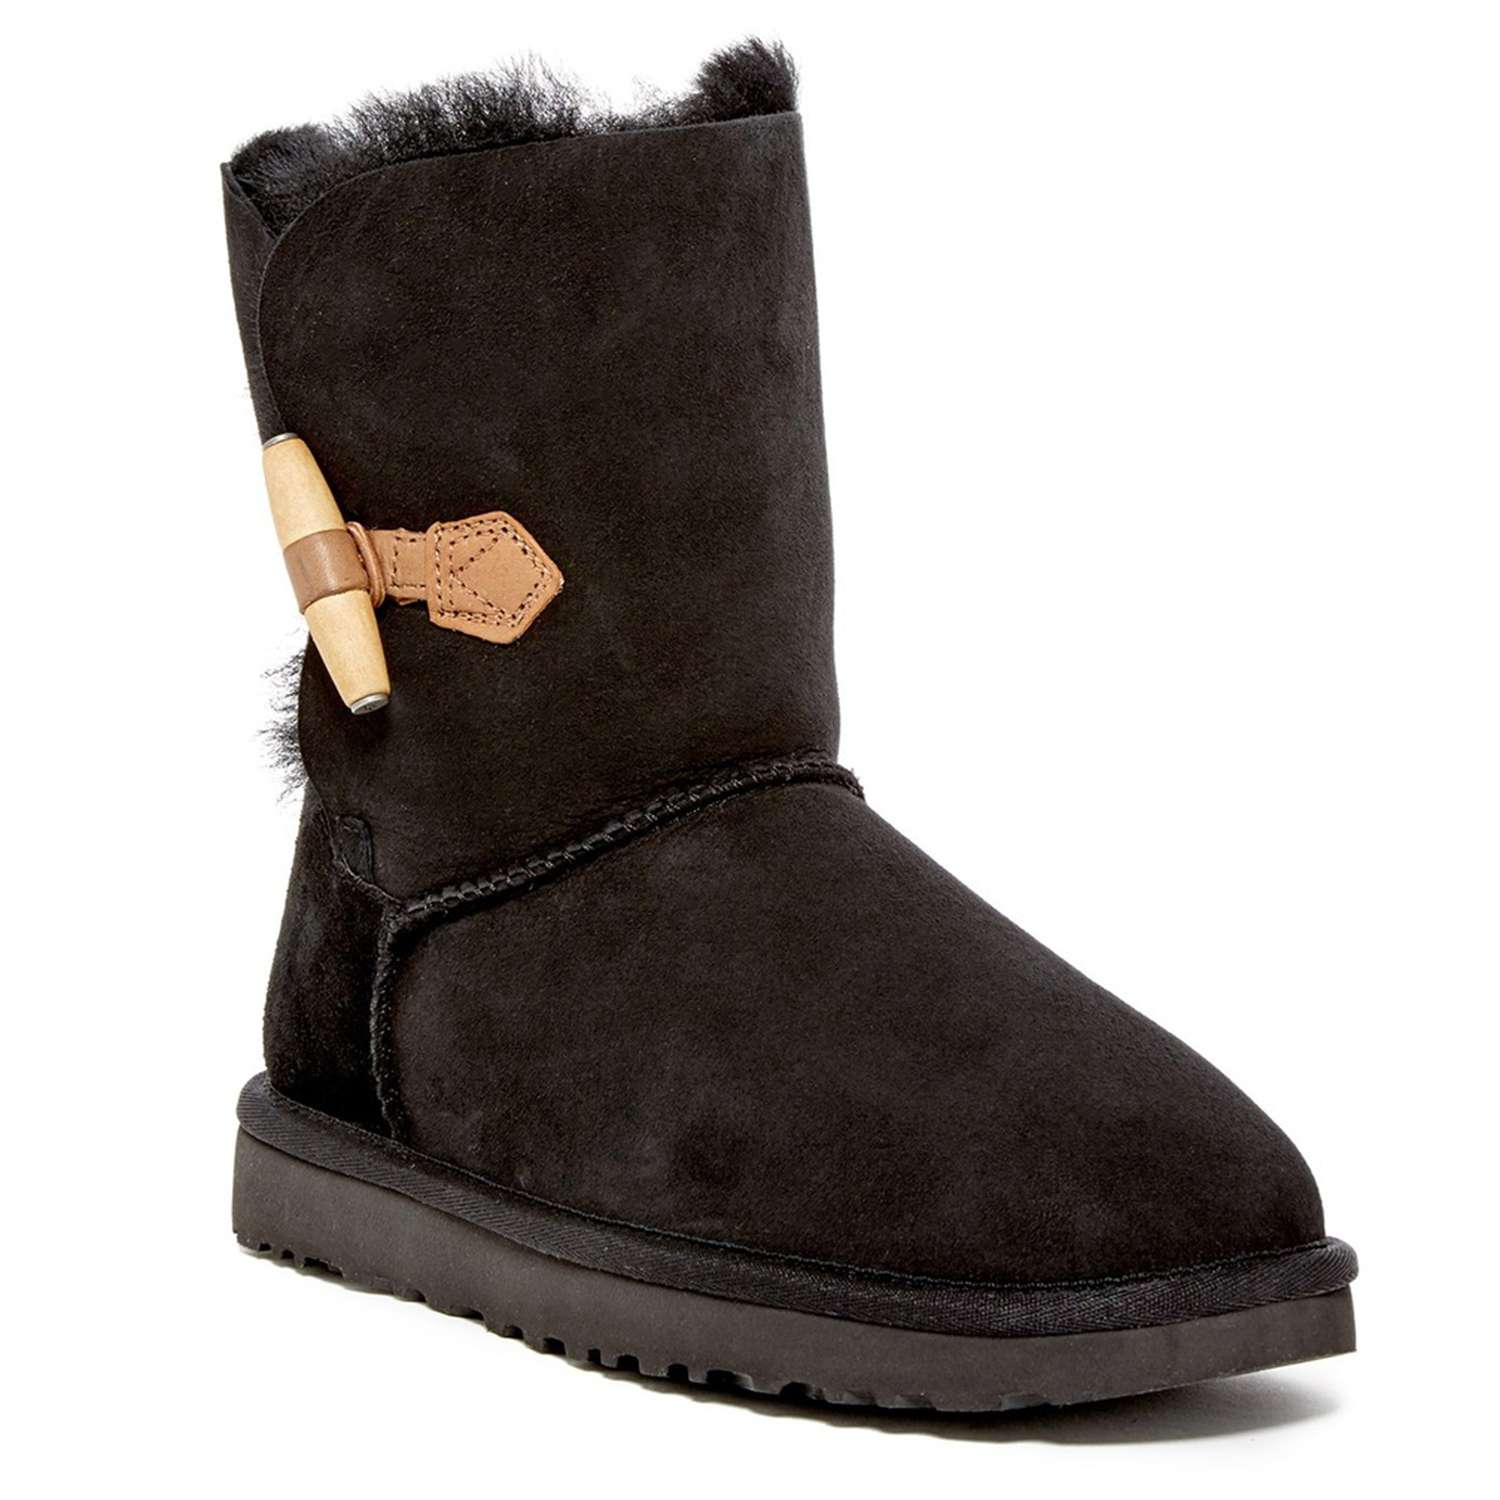 Uggs Boots and Slippers Are on Sale at Nordstrom Rack | PEOPLE.com